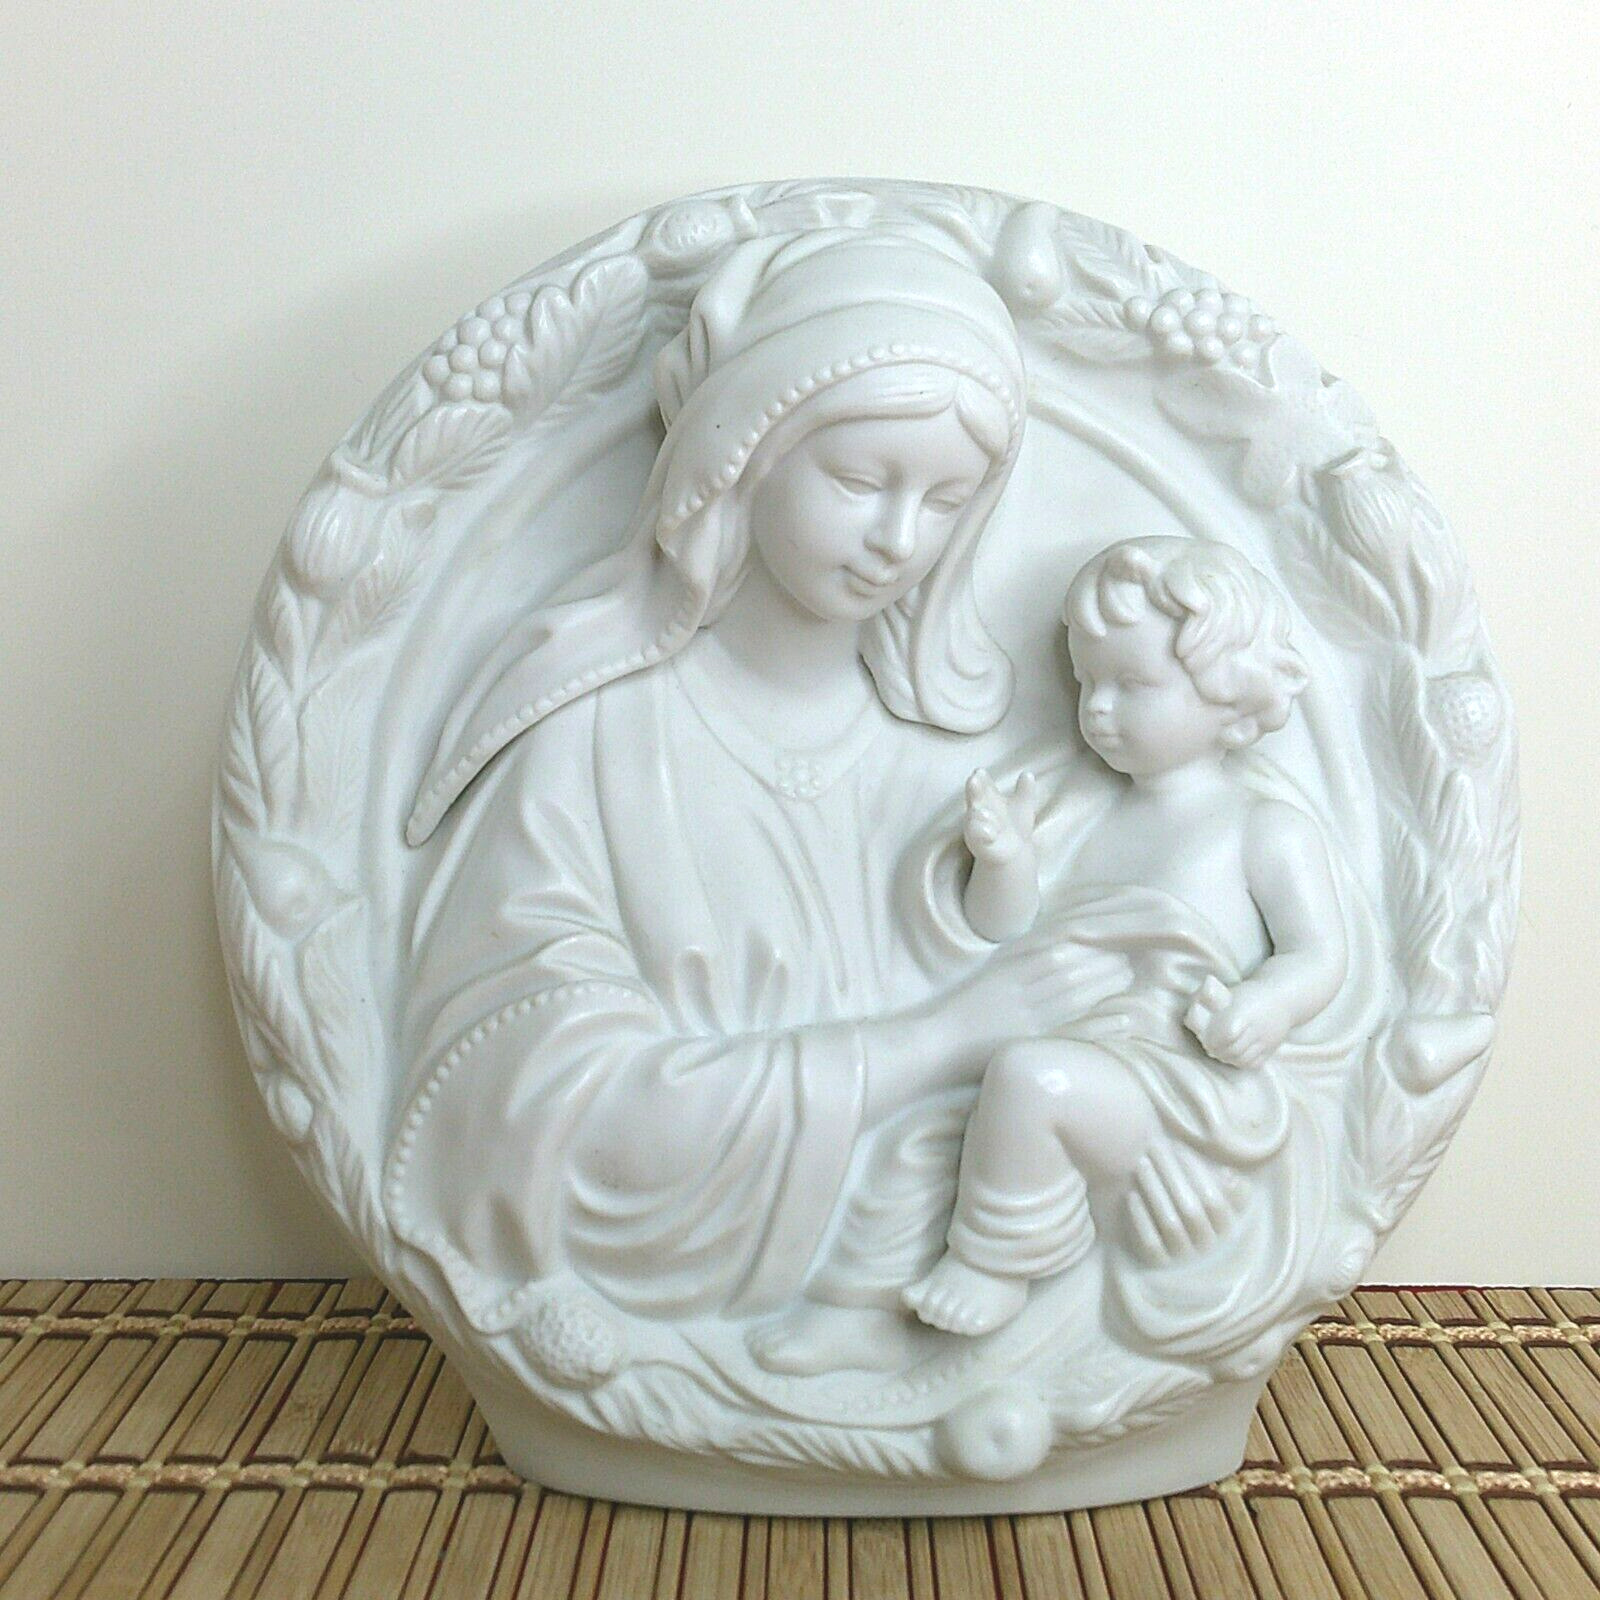 Mary, Madonna Mother and Child Religious Music Box Schmid 1988